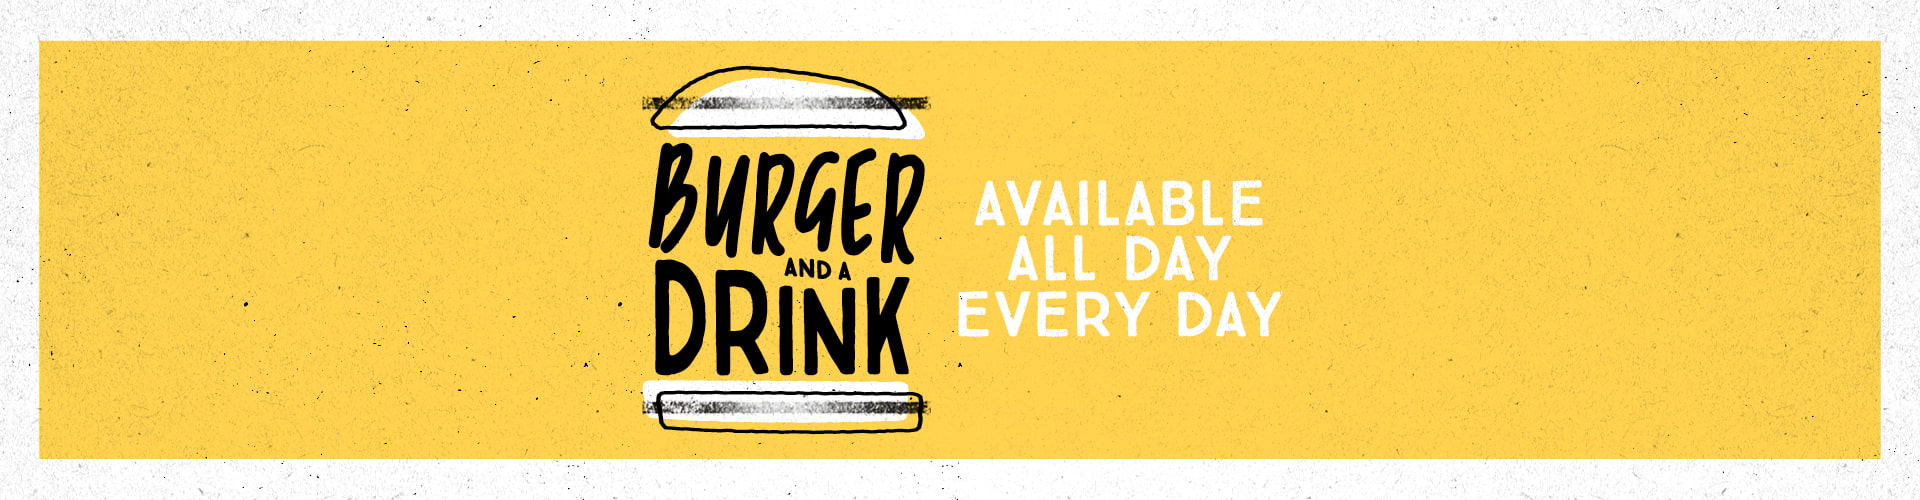 Burger and a Drink. Available All Day Every Day